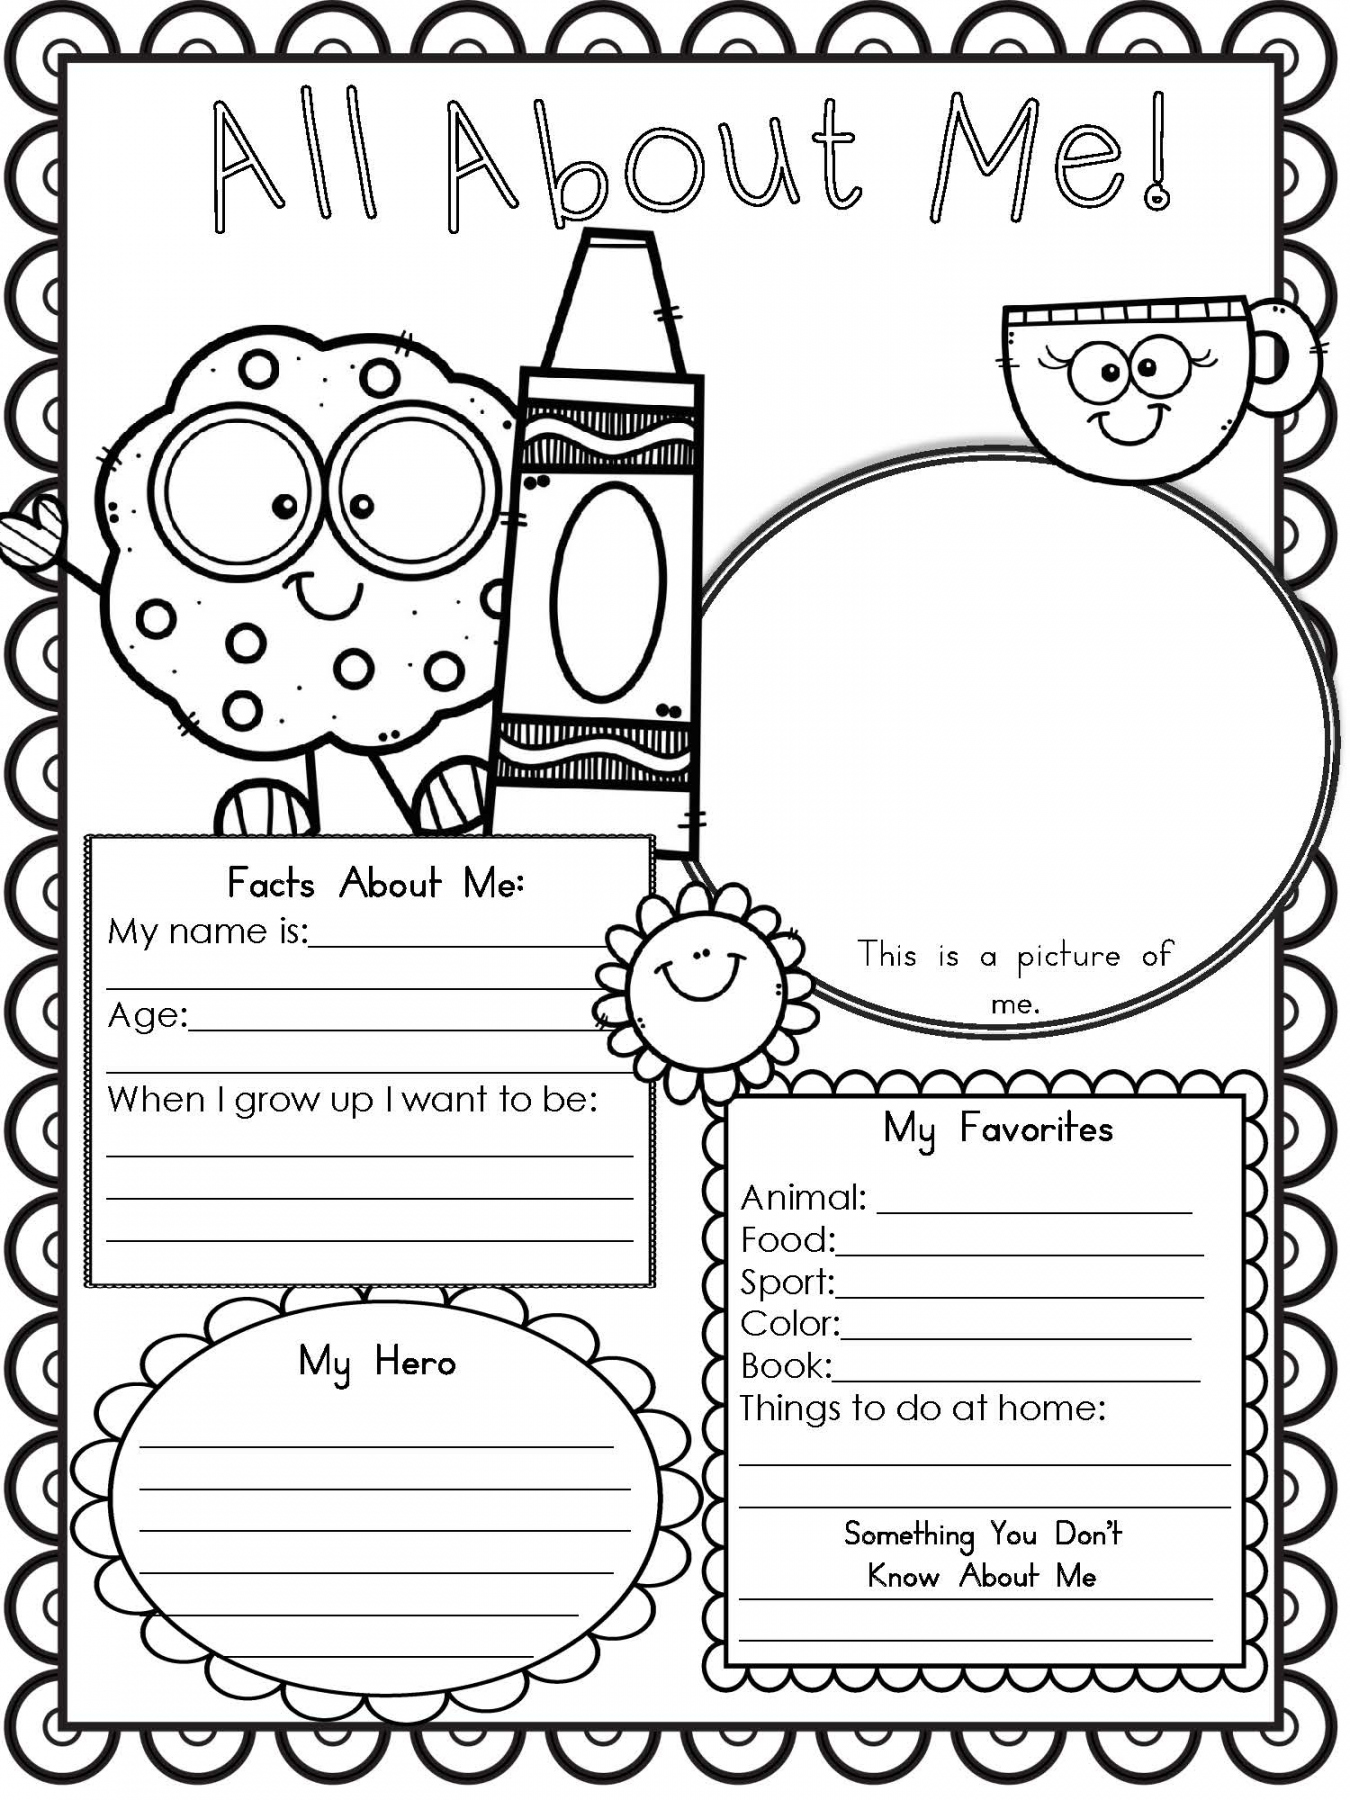 All About Me Free Printable - Printable - Free Printable All About Me Worksheet - Modern Homeschool Family